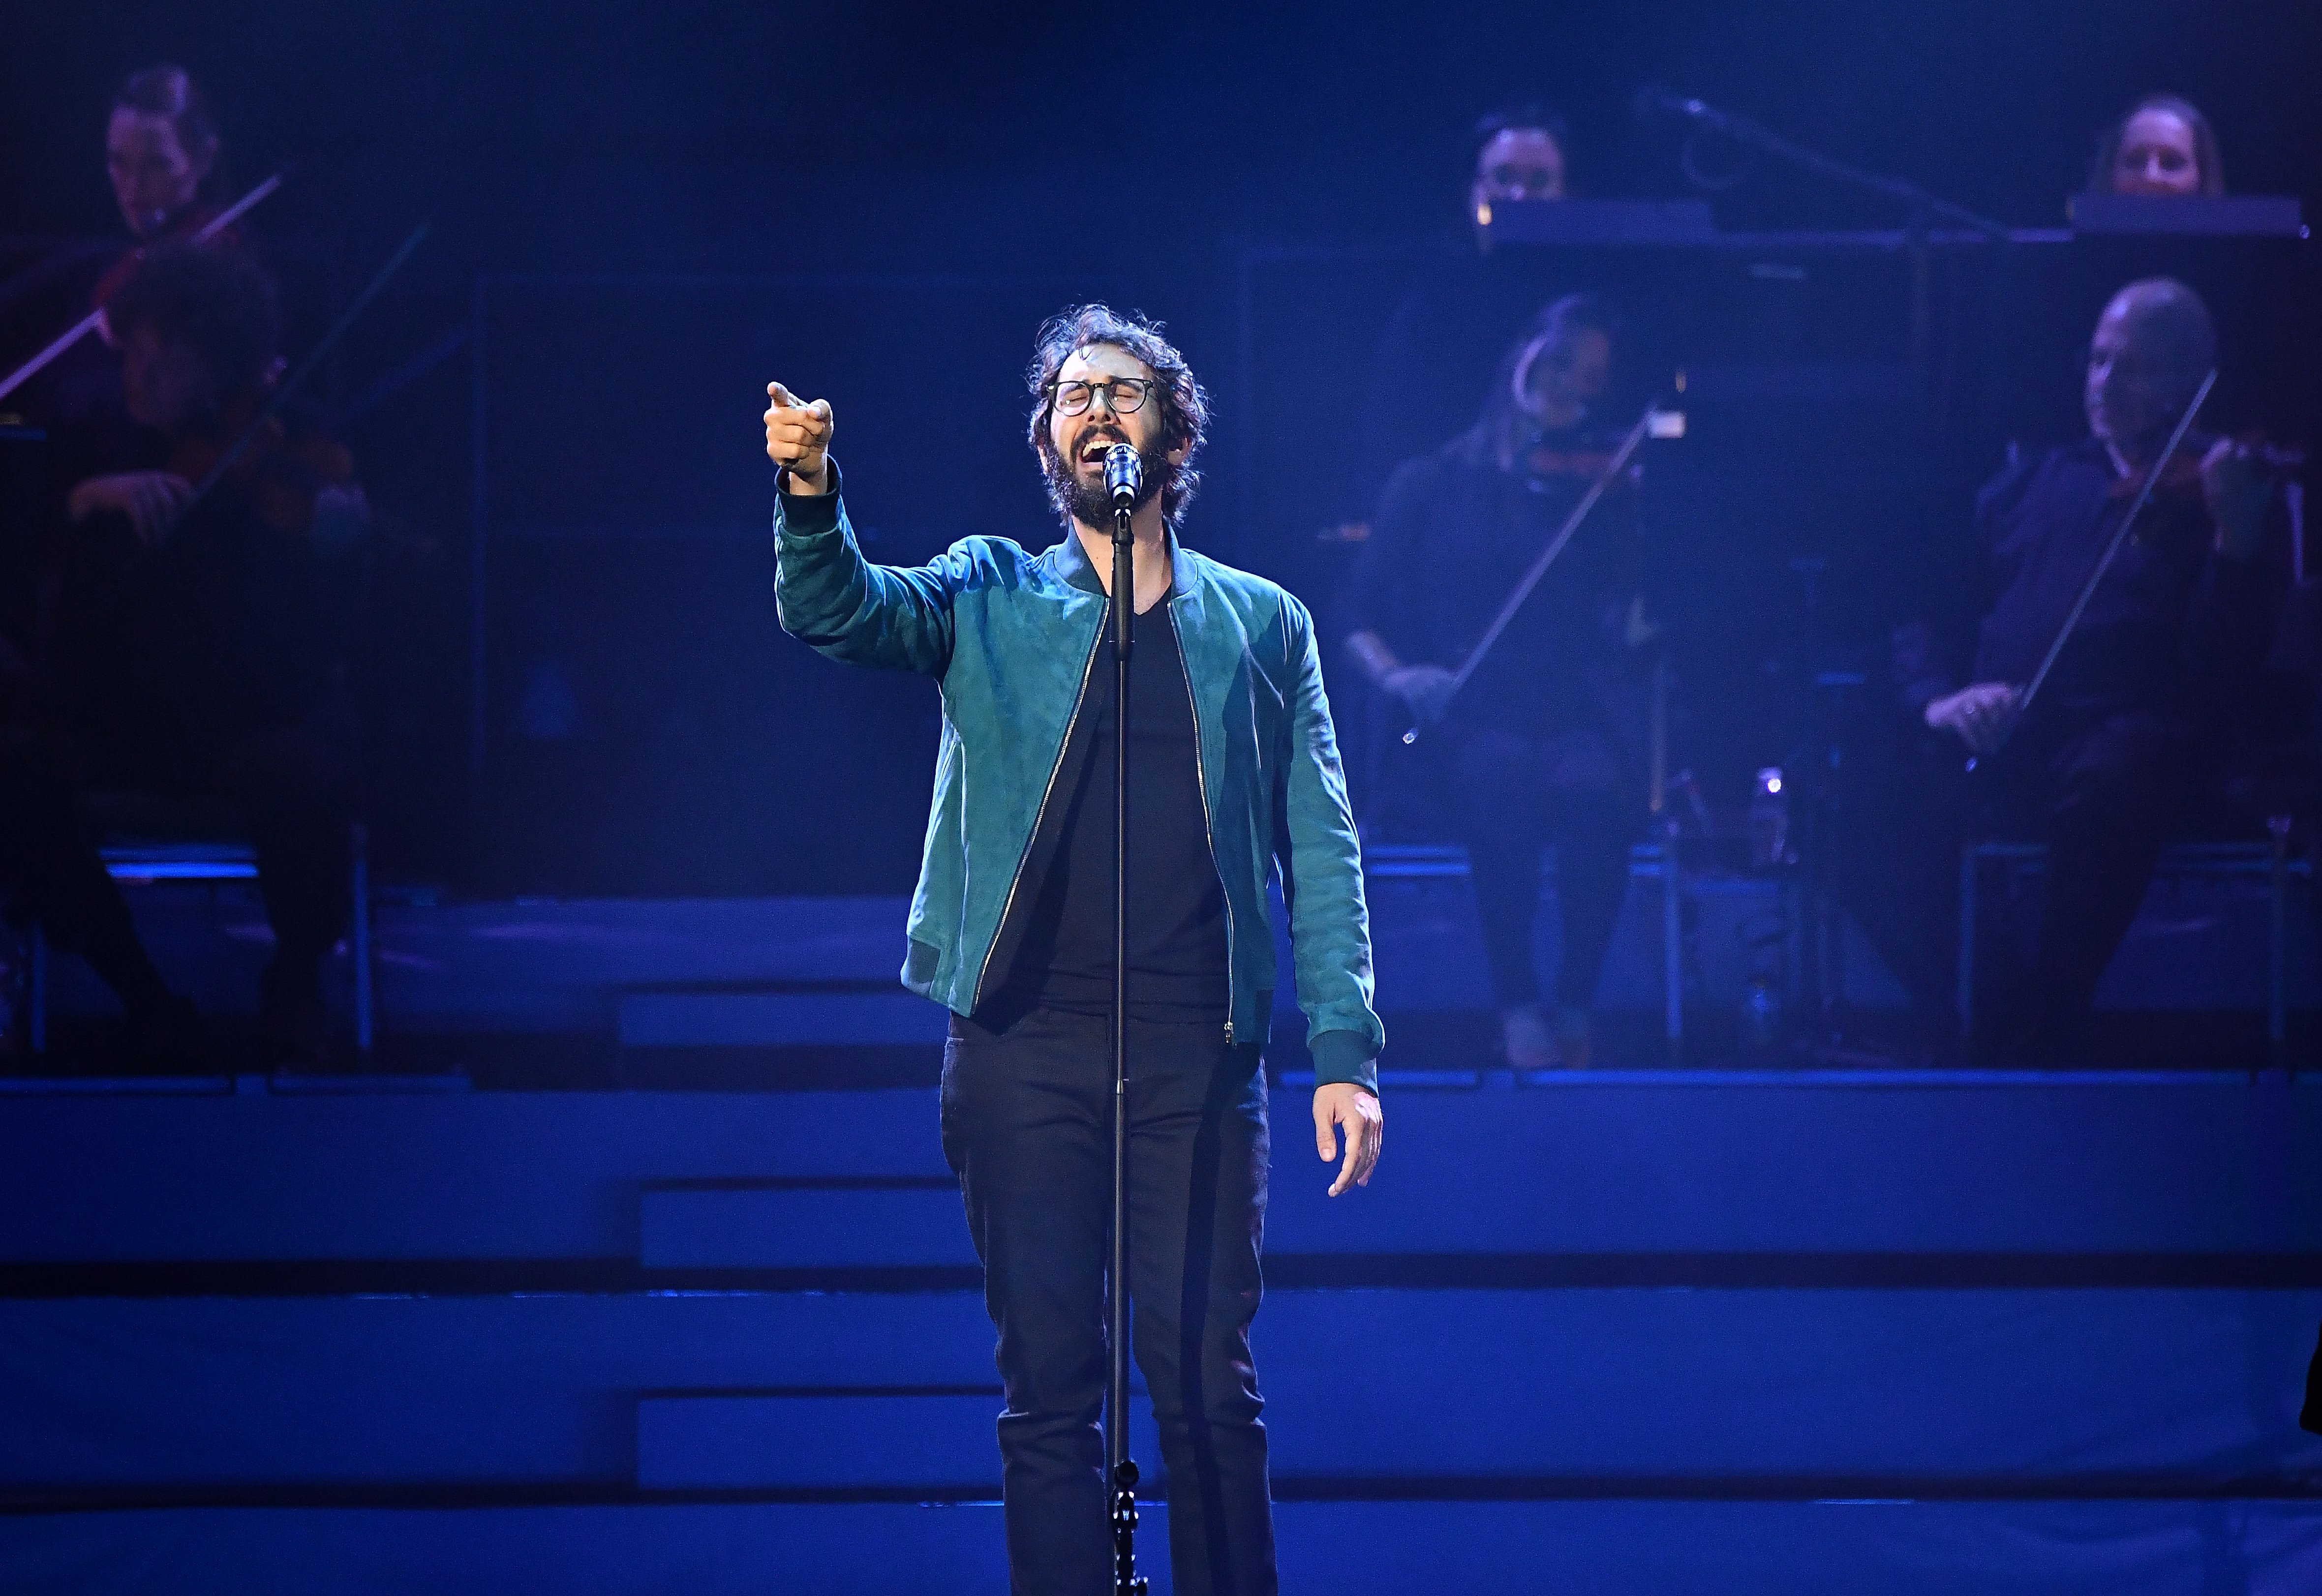 Josh Groban’s Relationships with 5 Actresses & a Singer before He Fell